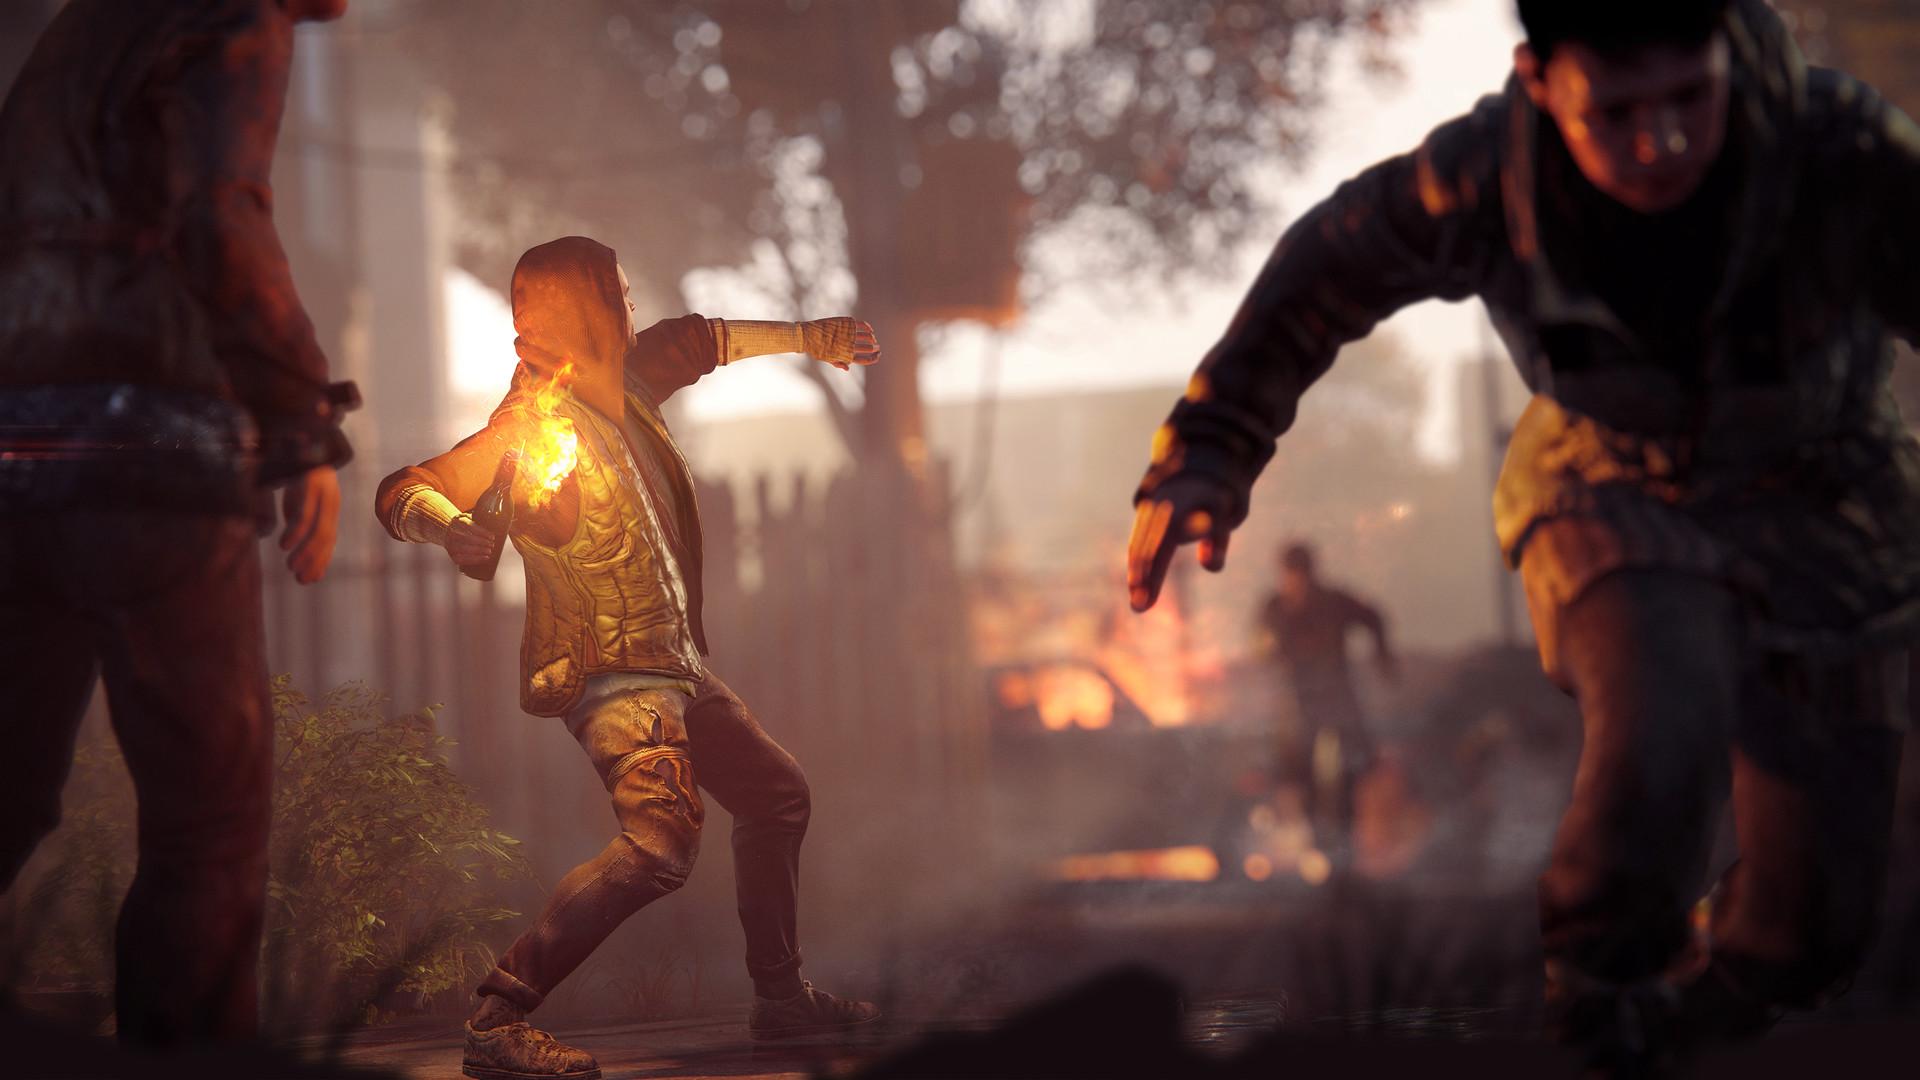 Screenshot №11 from game Homefront®: The Revolution